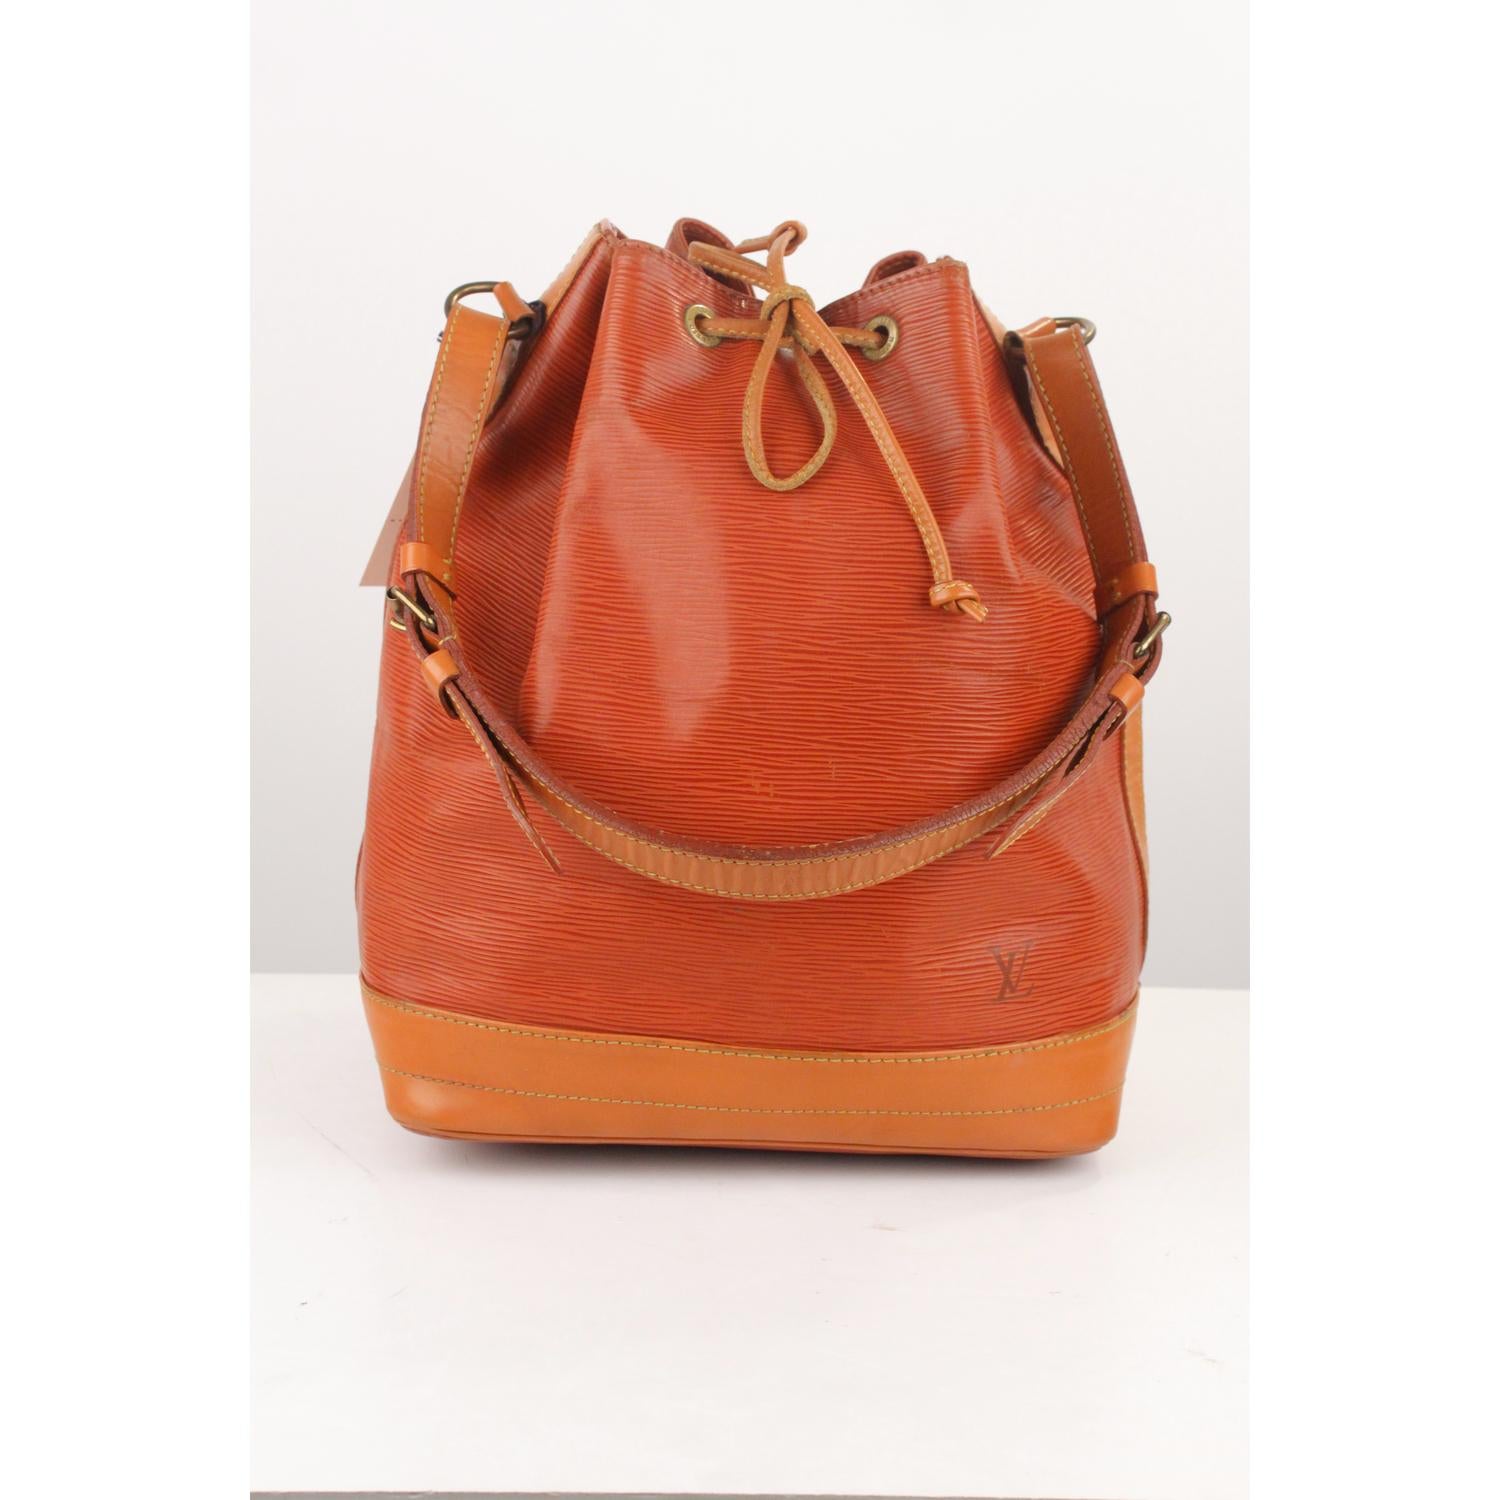 We offer Certificate of Authenticity provided by Entrupy for this item at no further cost.

Iconic NOE' by LOUIS VUITTON was first created in 1932 to carry champagne bottles. Tan Epi Leather with smooth leather trim, with drawstring closure and